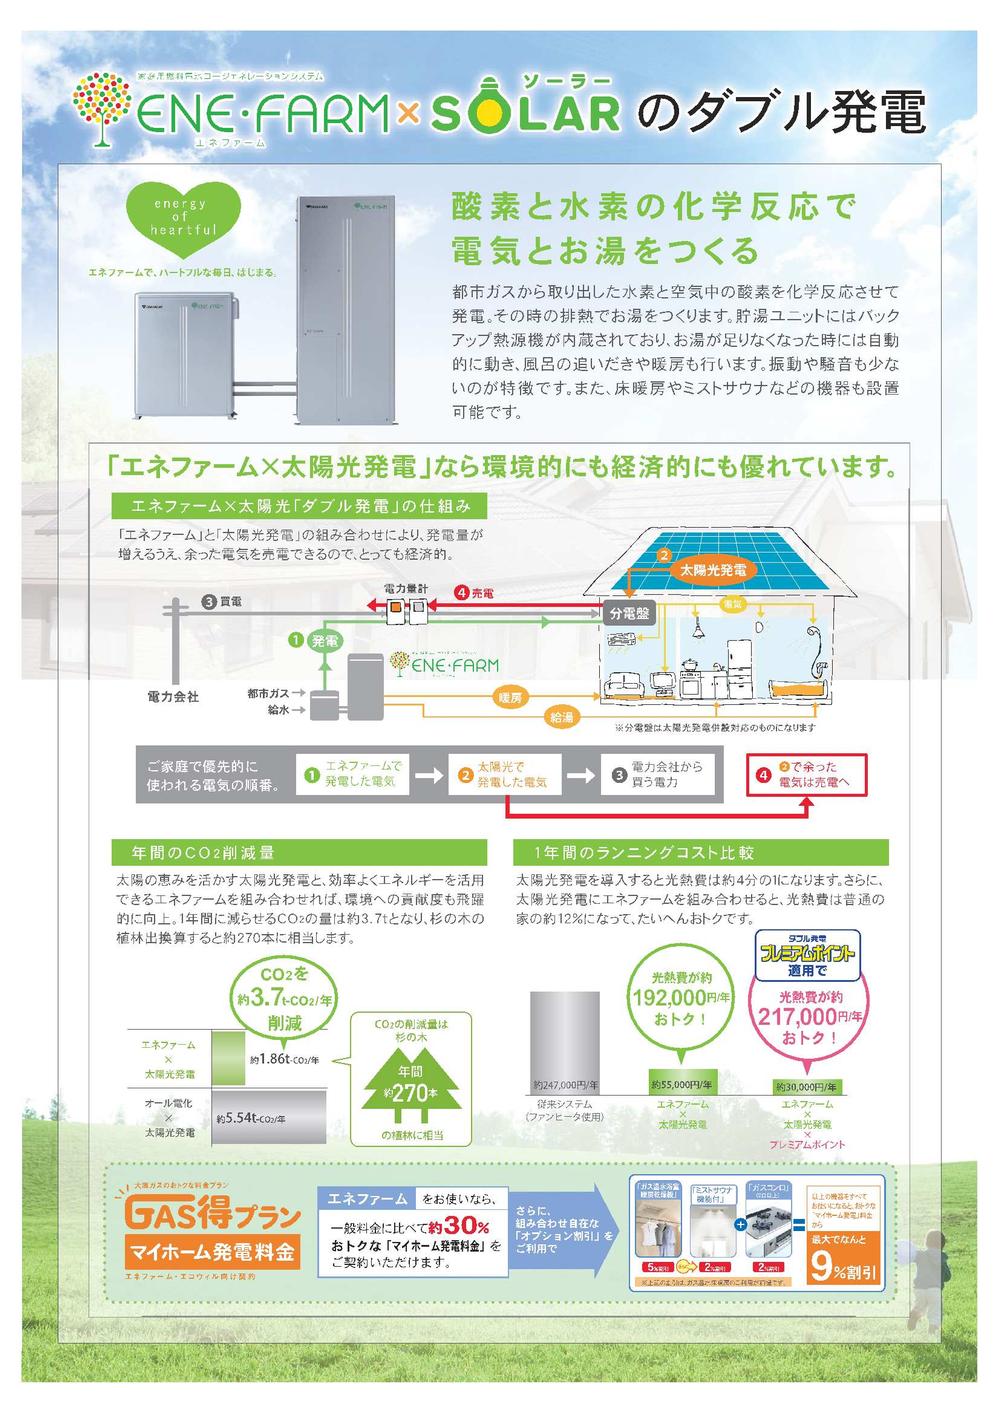 Power generation ・ Hot water equipment. ENE-FARM can be generated by his residence "fuel cell". It is a cogeneration system to produce even hot water by utilizing the waste heat (model only)